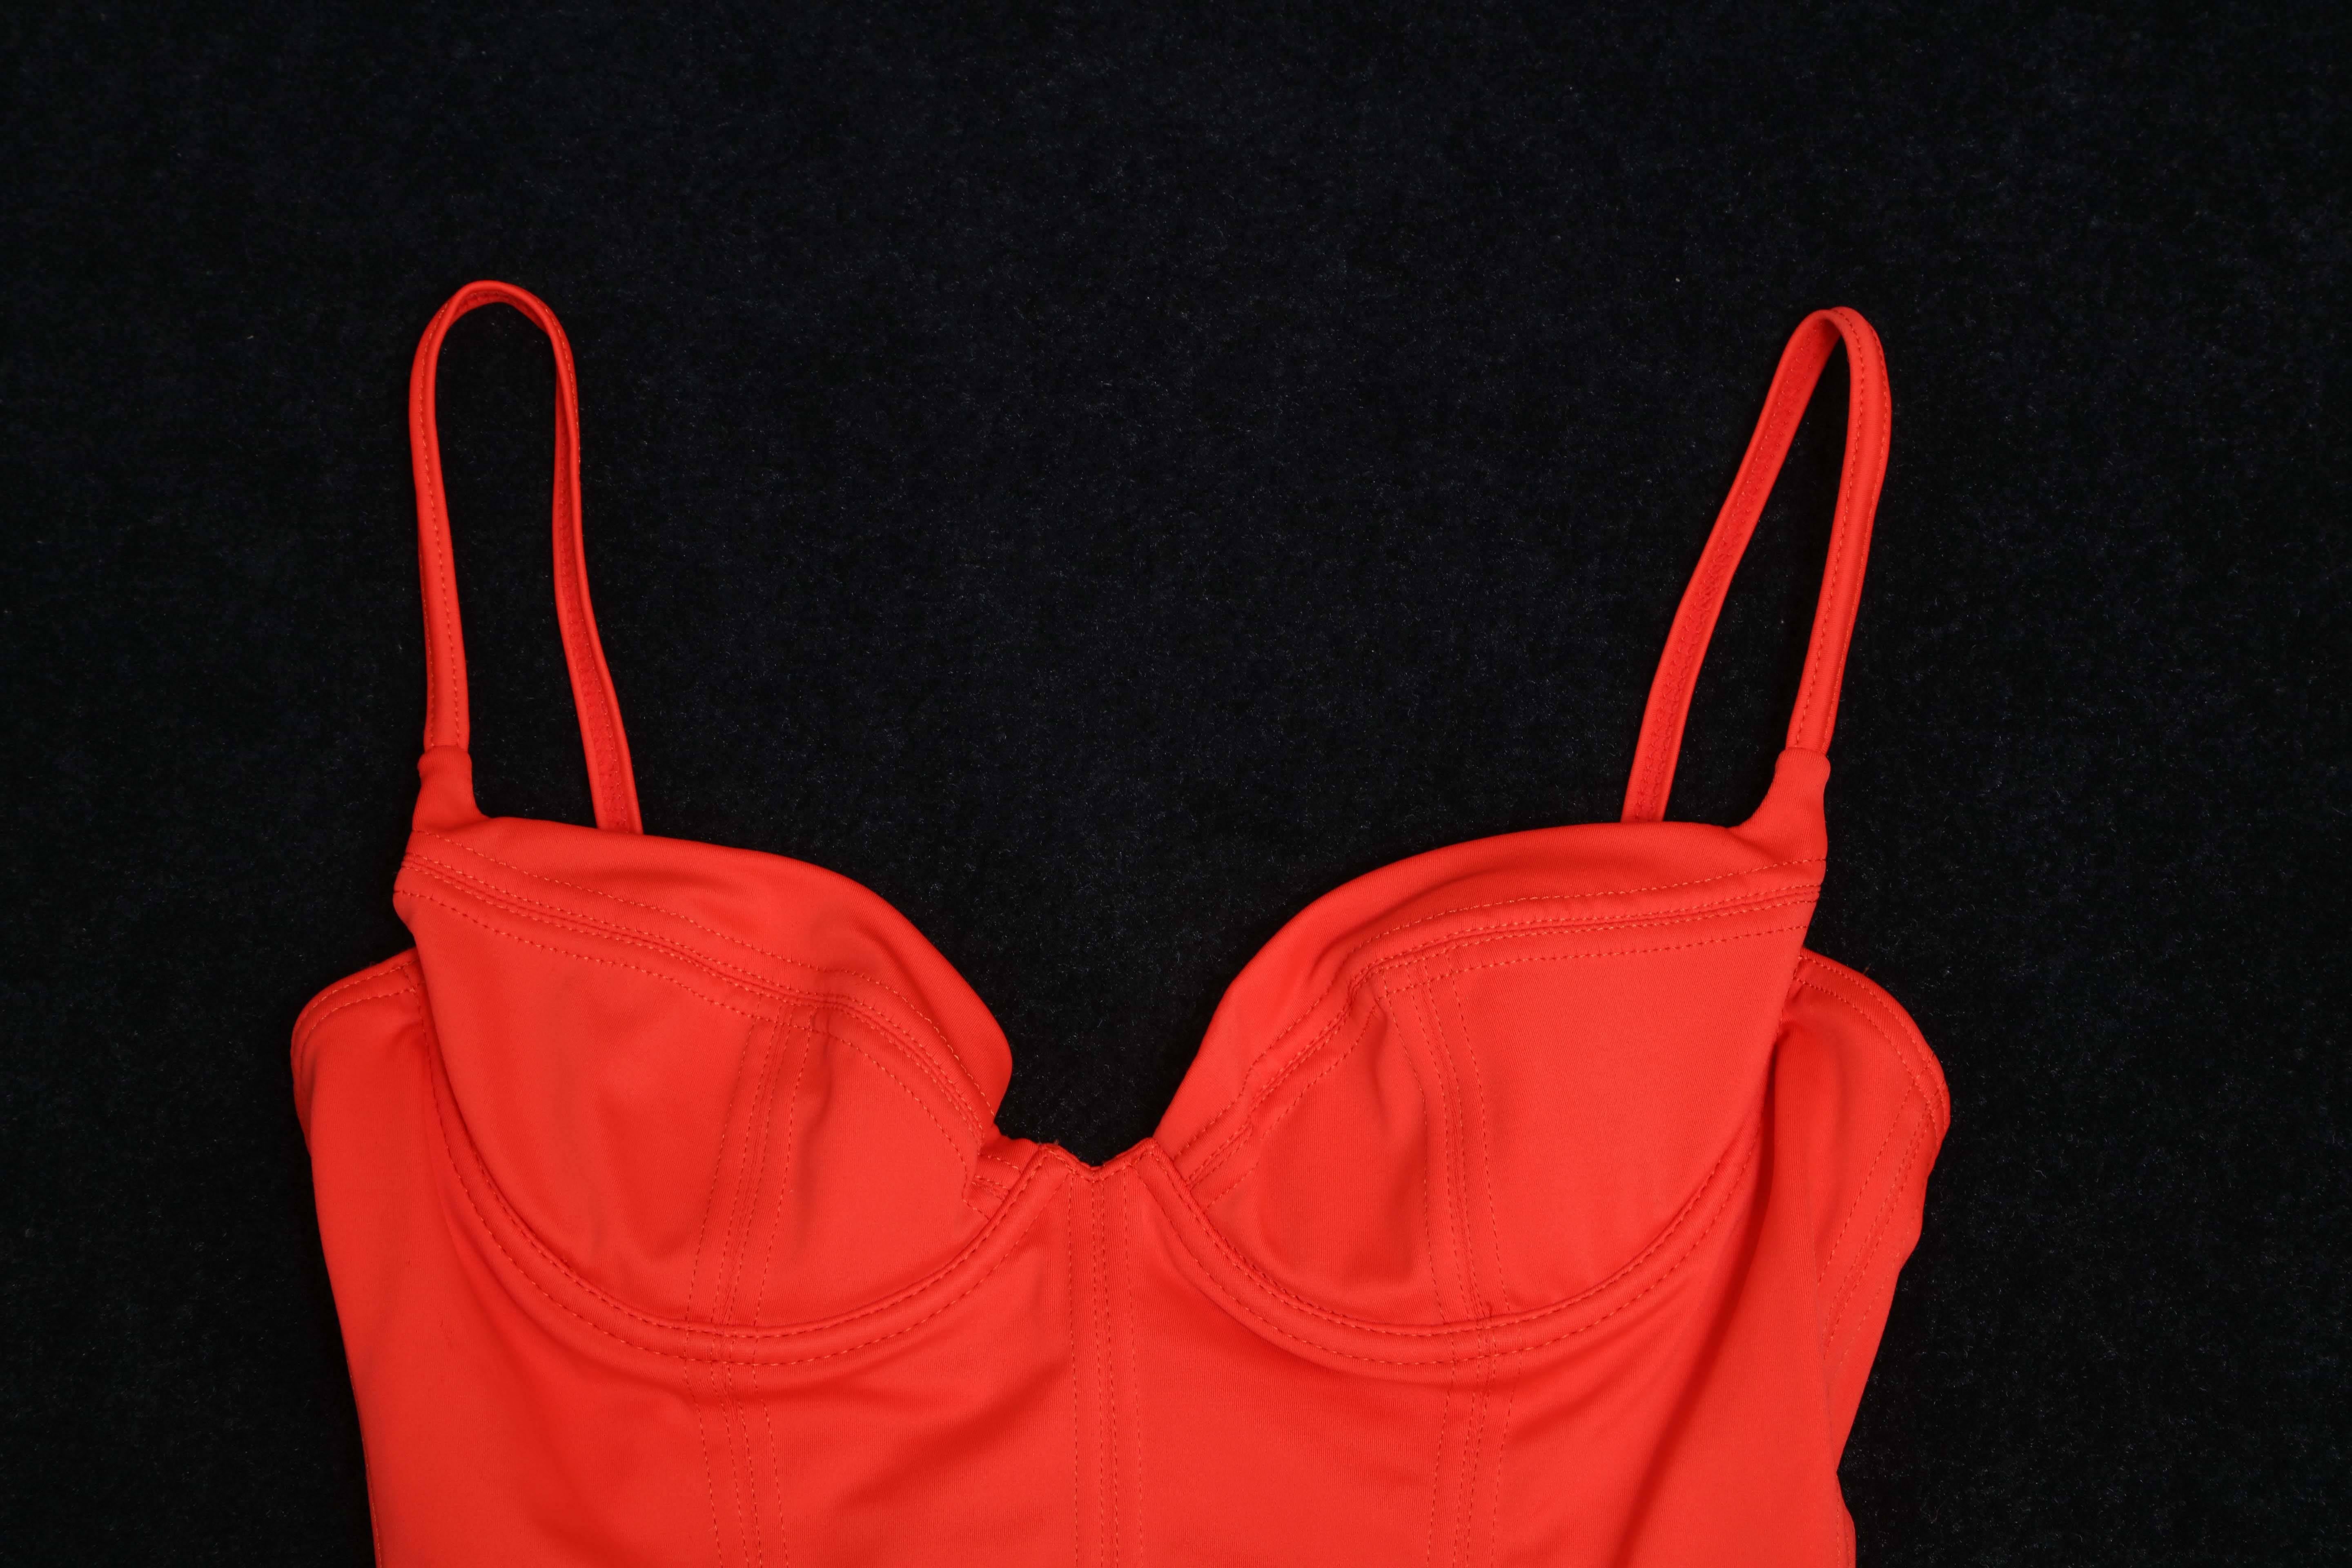 Very rare vintage Chanel red swimsuits as seen on Claudia Schiffer. From 1995 Spring collection.
French size 38